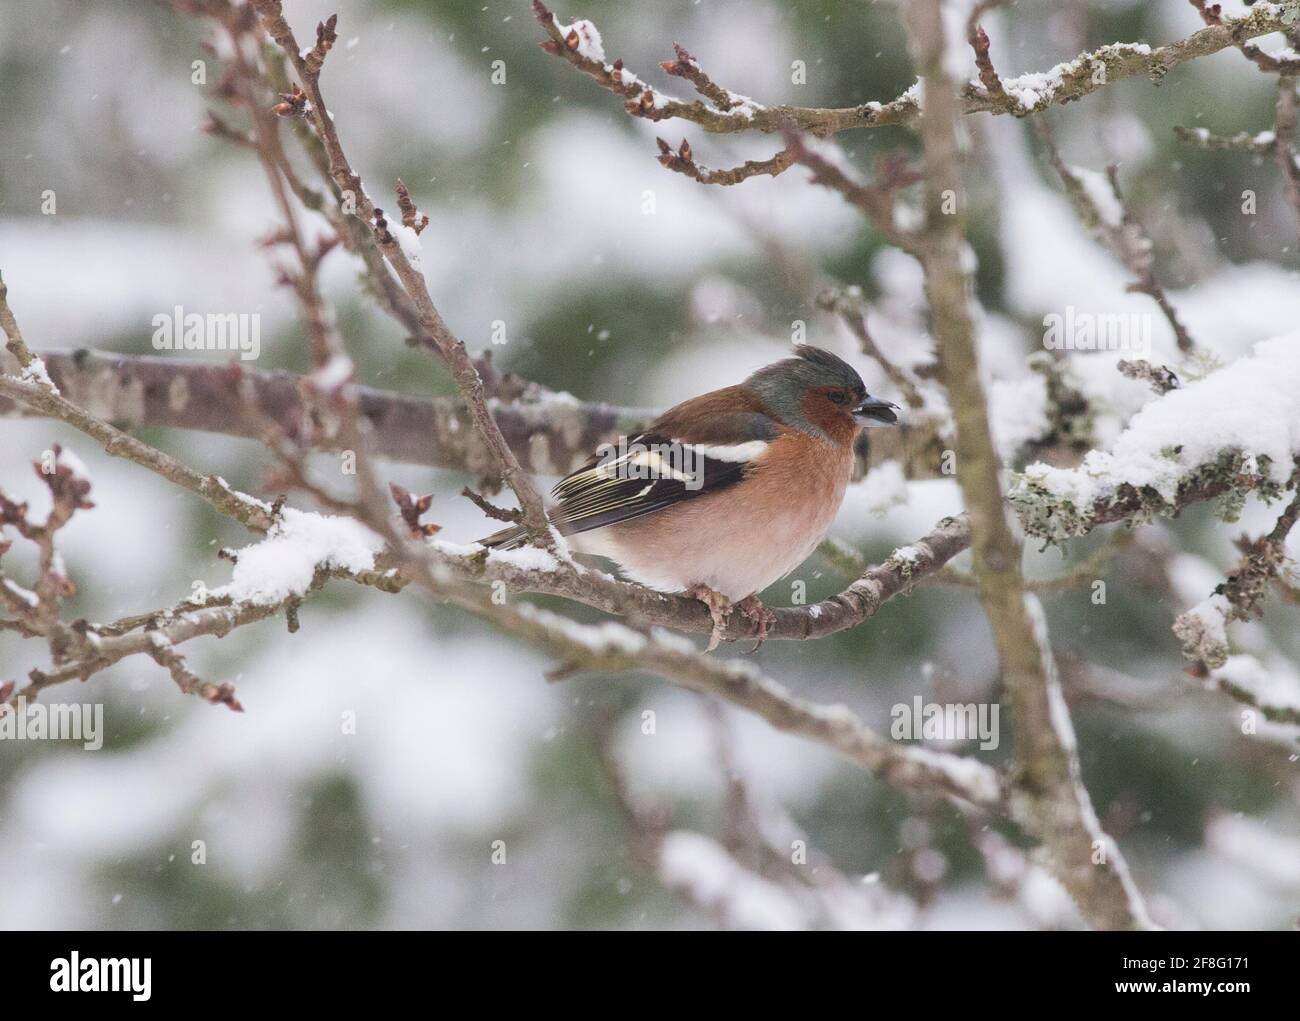 COMMON CHAFFINCH Fringilla coelebs on branch early spring with snow Stock Photo